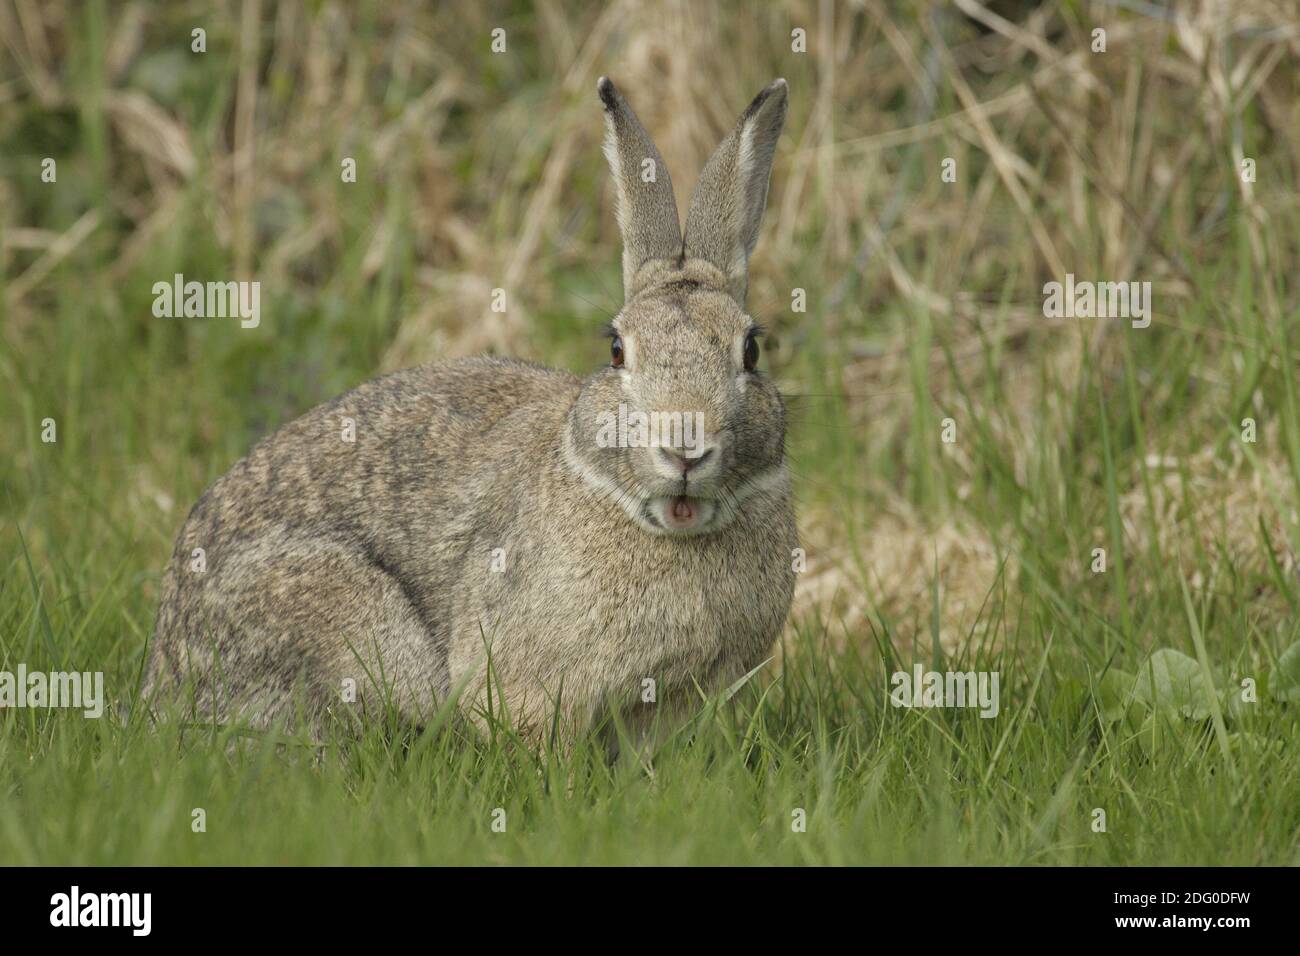 Wildkaninchen, Oryctolagus cuniculus, cotonmouth Banque D'Images